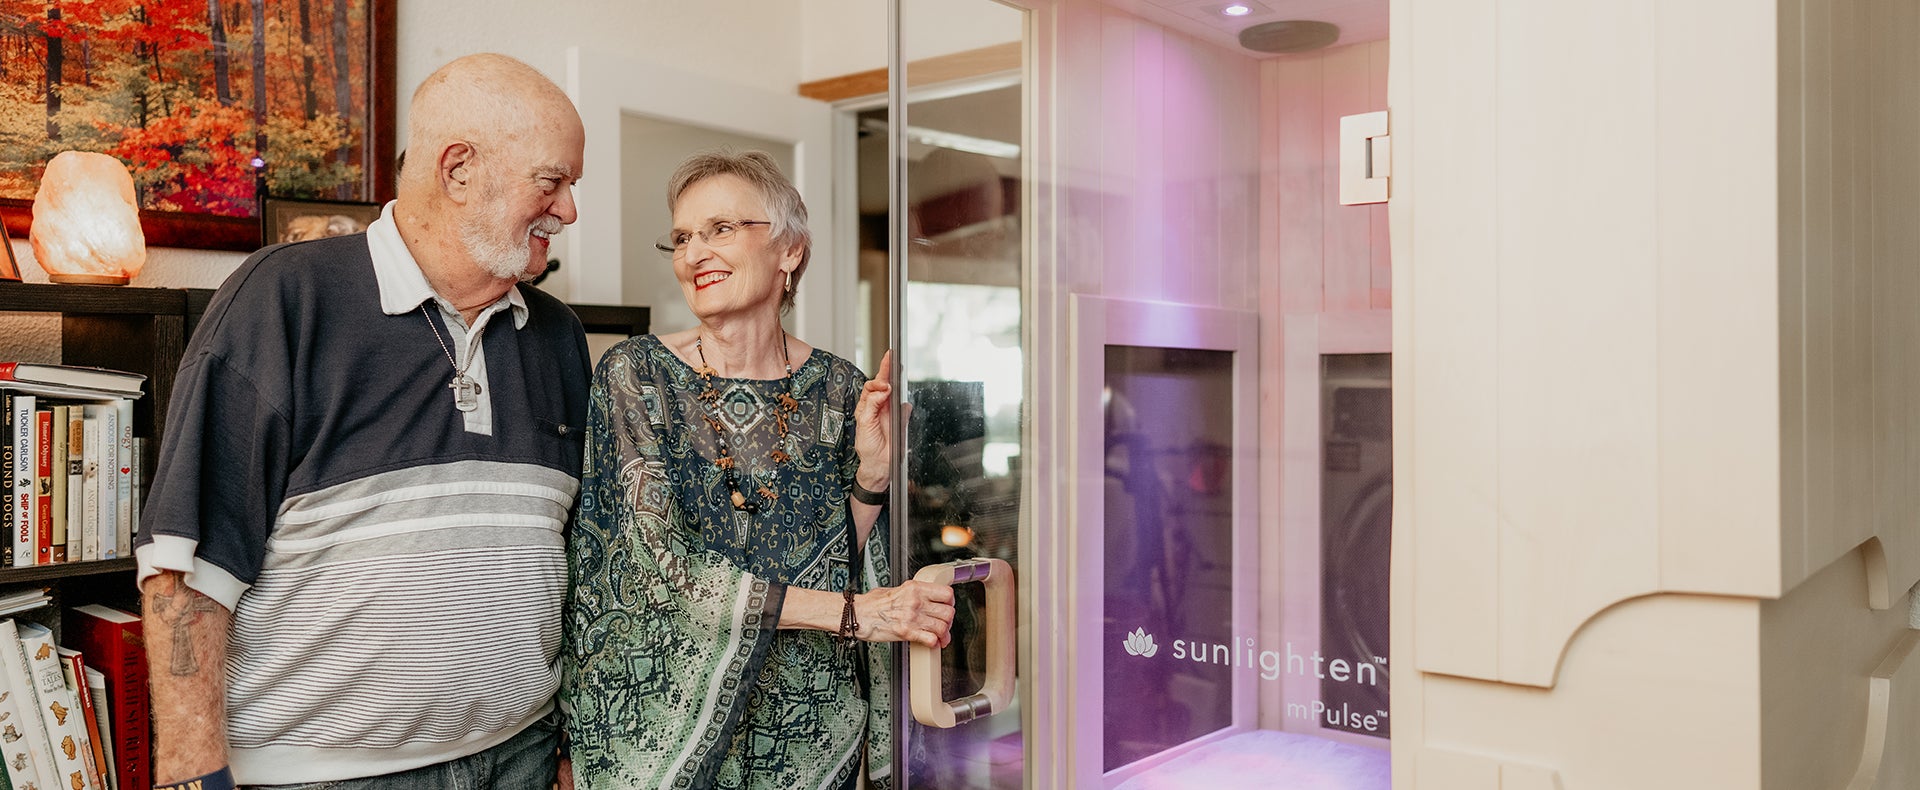 Ginny Marriott and husband in front of mPulse sauna